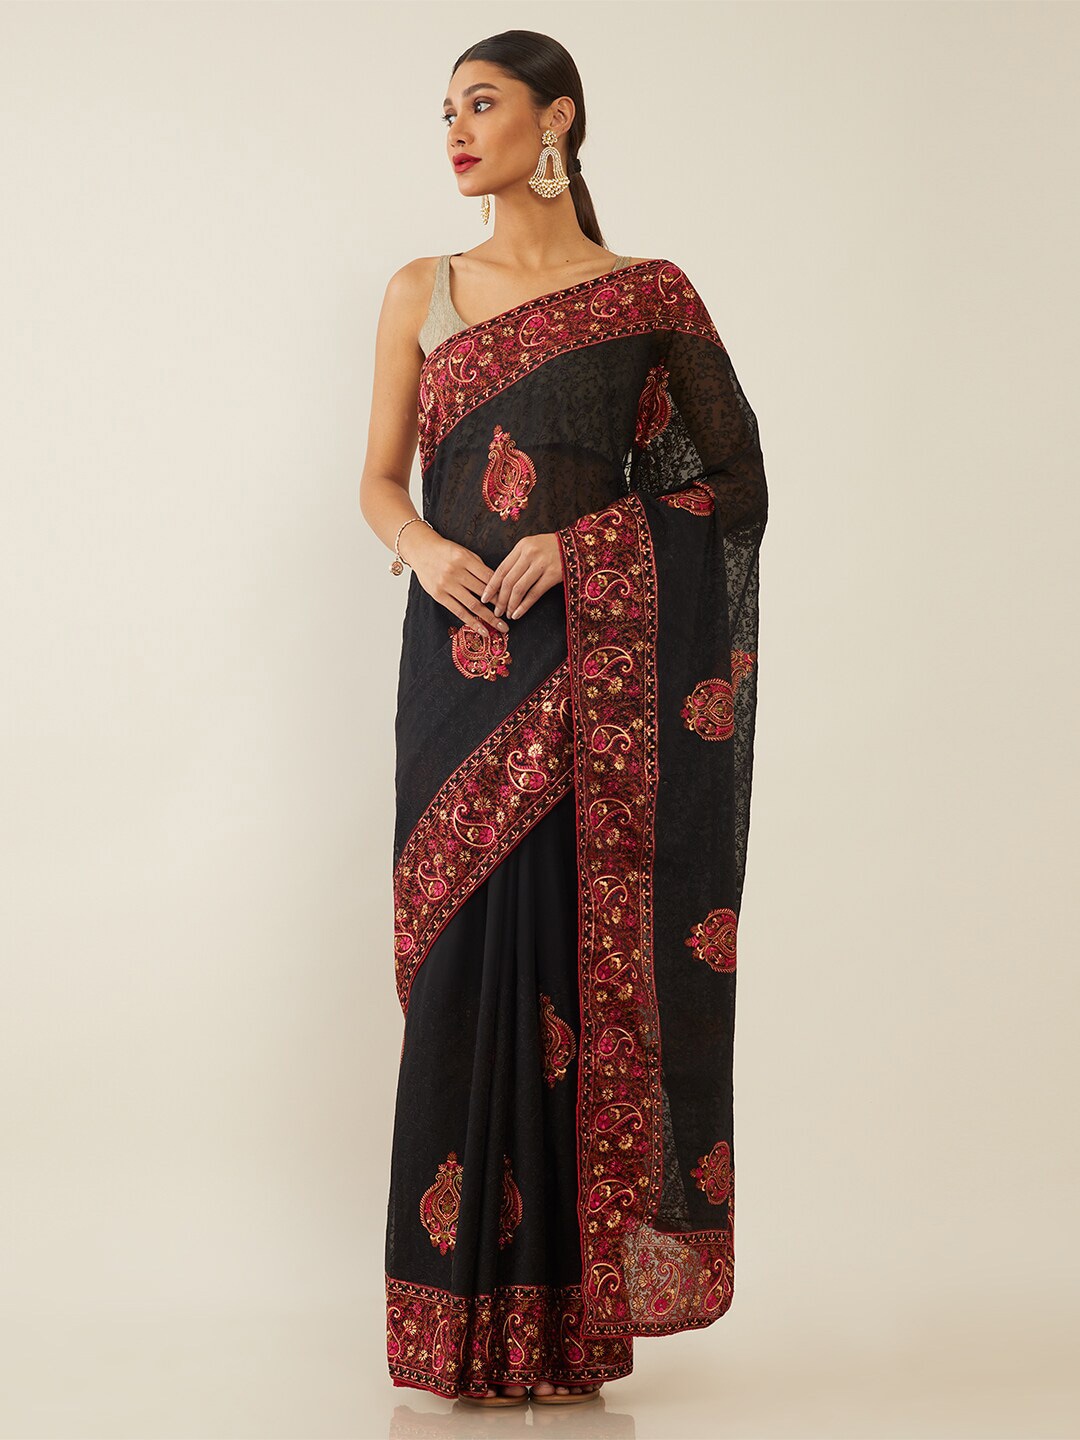 Soch Black & Red Paisley Embroidered Pure Georgette Saree Price in India